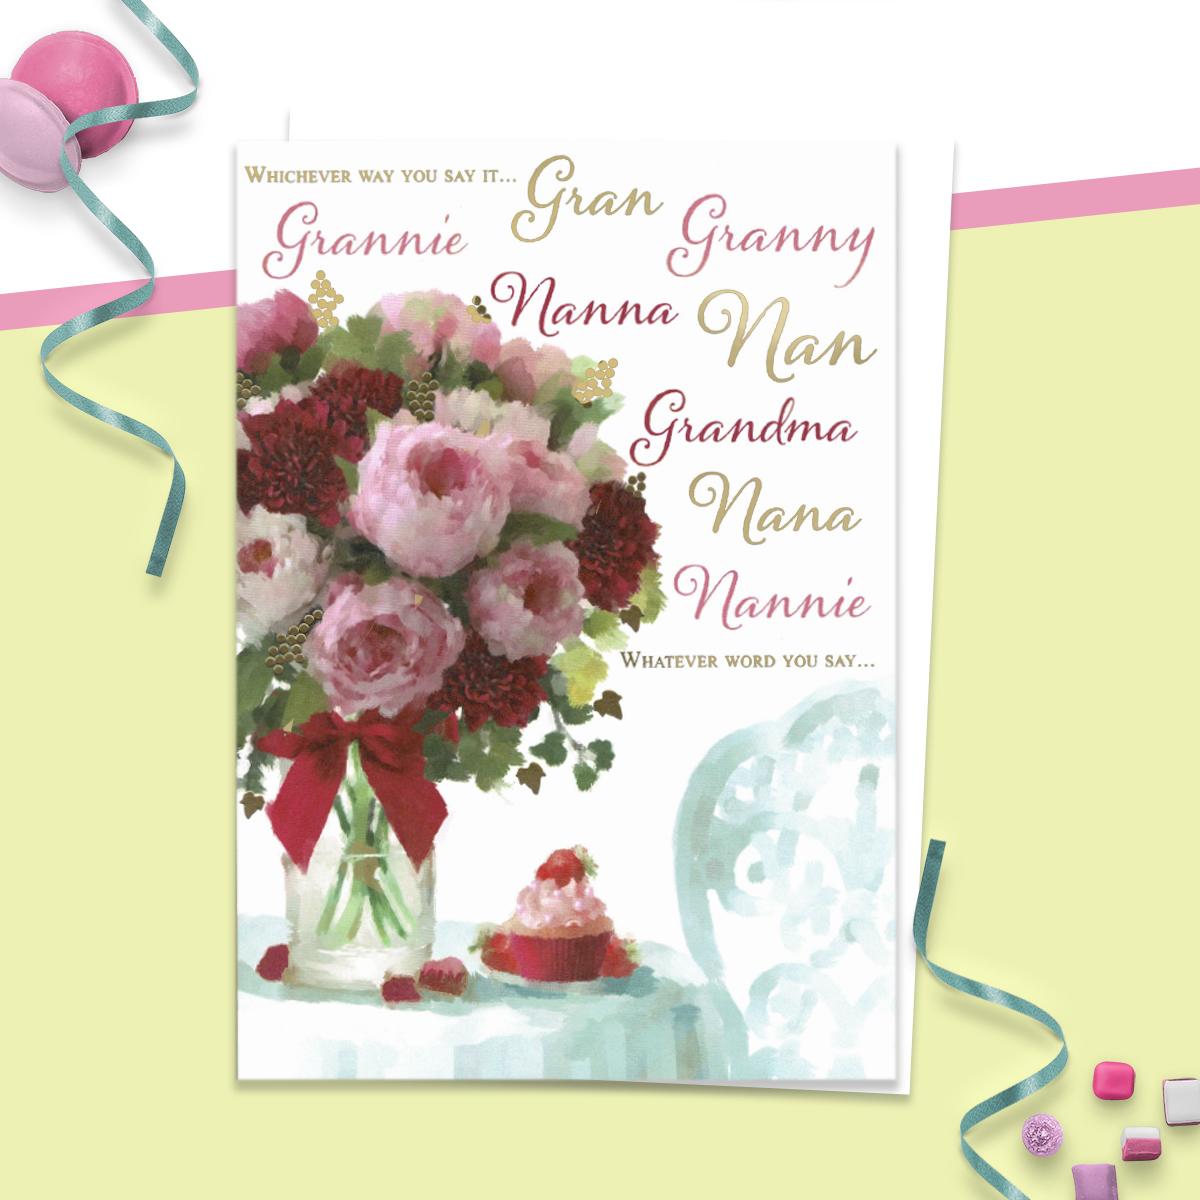 ' Whichever Way You Say It... Gran, Granny, Grannie, Nanna, Nan, Grandma, Nana, Nannie Whatever Word You Say...' A Beautiful Mother's Day Card for Any Female Grandparent. Showing Pink Peonies And Red Roses. Complete With White Envelope